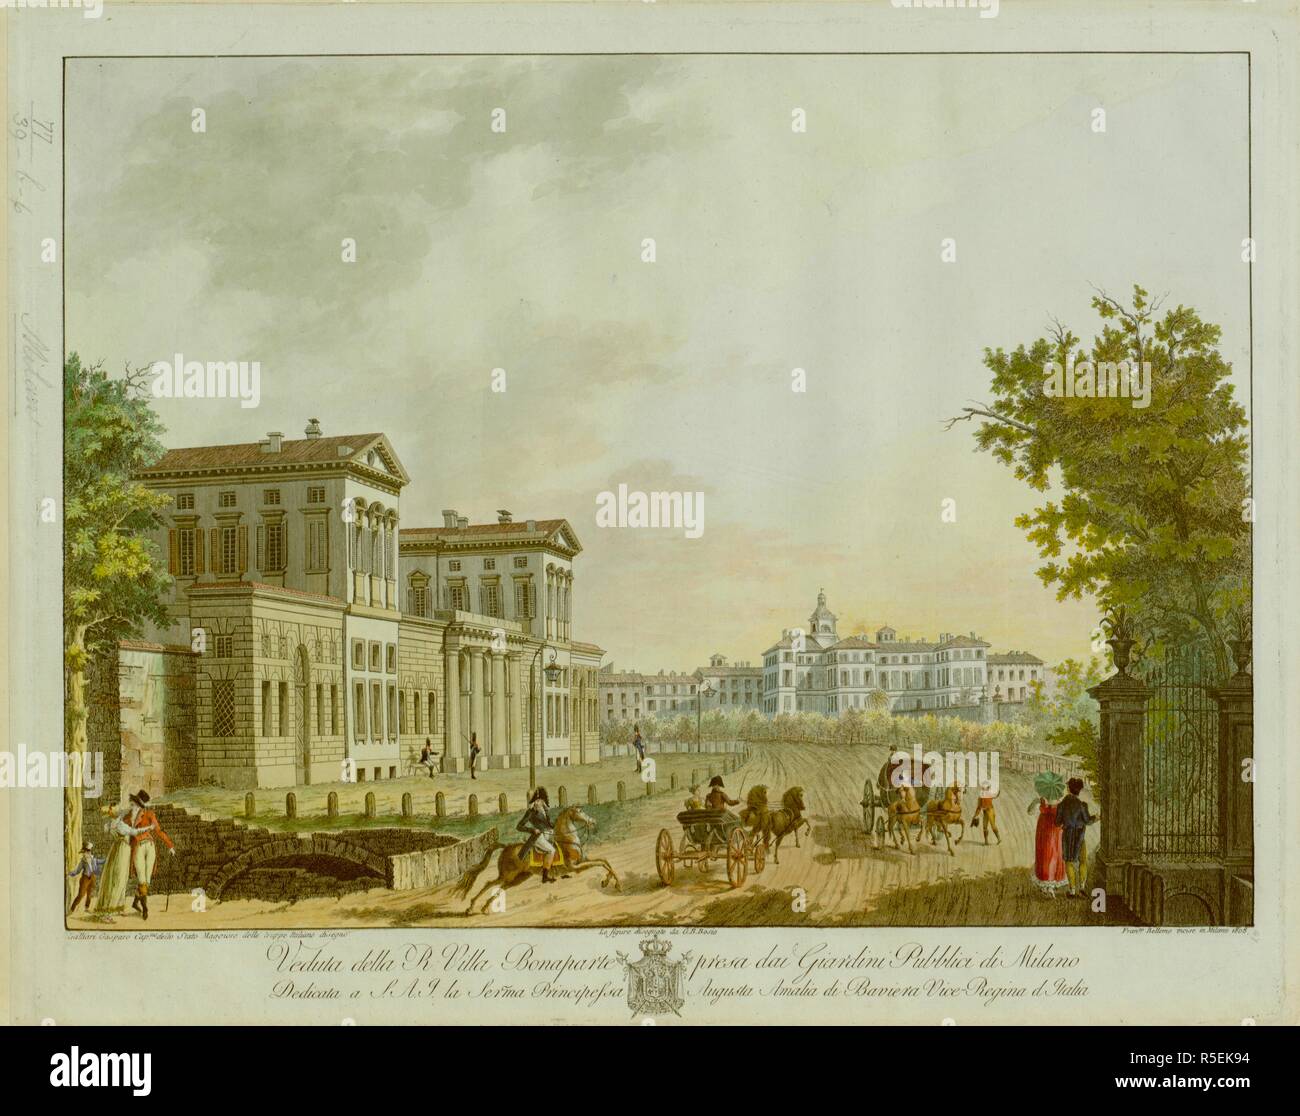 A family and a couple promenade along a road outside the gates of a park in the foreground. An officer on horseback and two carriages riding before the main entrance to the palace of EugÃ¨ne de Beauharnais guarded by three soldiers in the background. Veduta della R. Villa Bonaparte presa dai Giardini Pubblici di Milano : Dedicata a S.A.I. la Serma Principessa Augusta Amalia di Baviera Vice Regina d'Italia. [Milan] : [publisher not identified], [1808]. Source: Maps K.Top.77.39.b.6. Language: Italian. Stock Photo